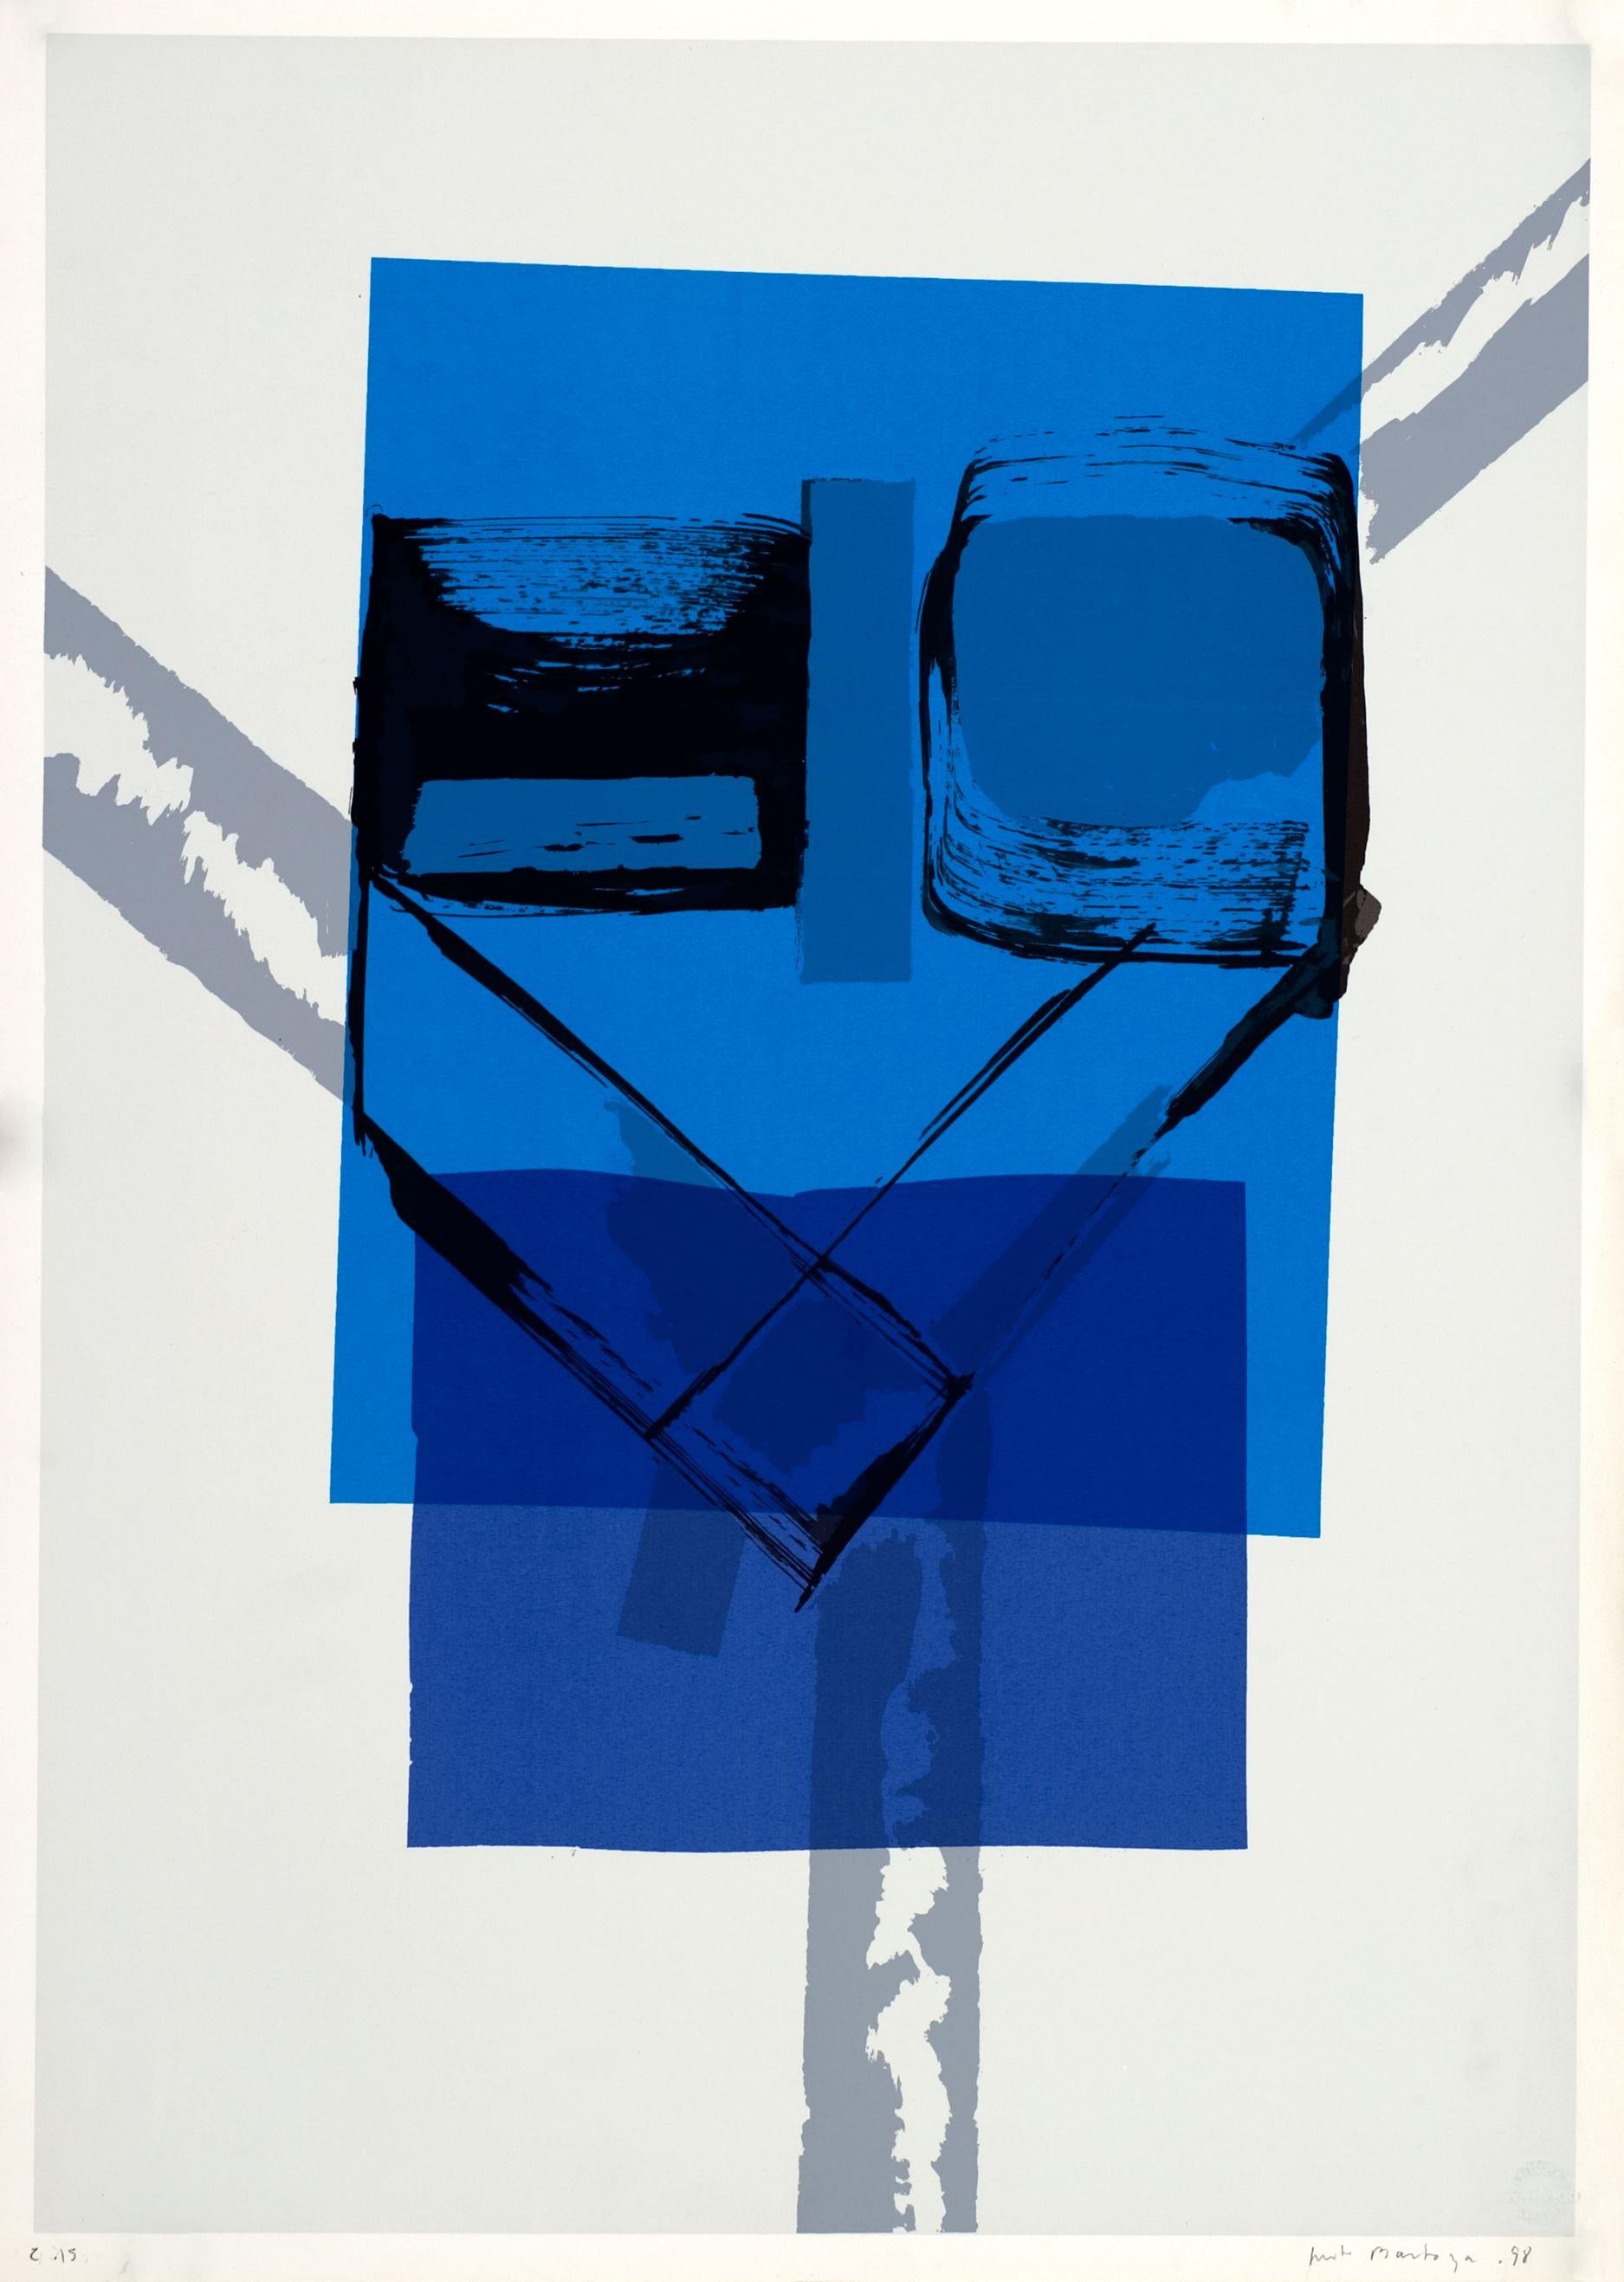 "Justo Barboza (Argentina, 1938)
'Sin título (azul turquesa)', 1998
silkscreen on paper Guarro Geler
27.6 x 19.7 in. (70 x 50 cm.)
Edition of 30
Unframed
ID: BAR1437-018-015
Hand-signed by author